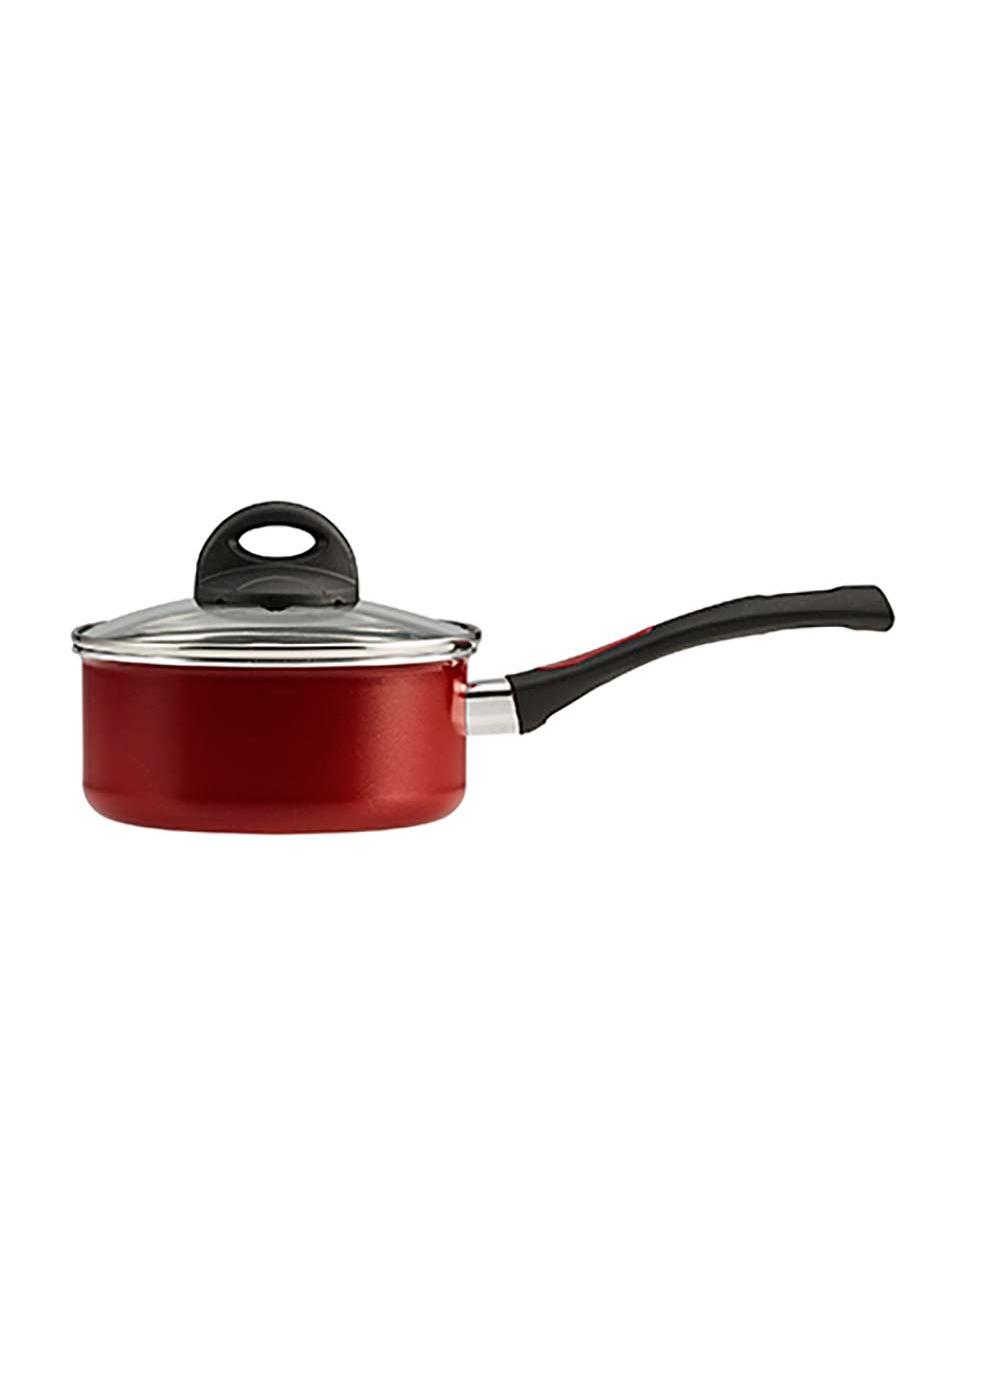 Tramontina Non-Stick Red Cookware Set; image 7 of 14